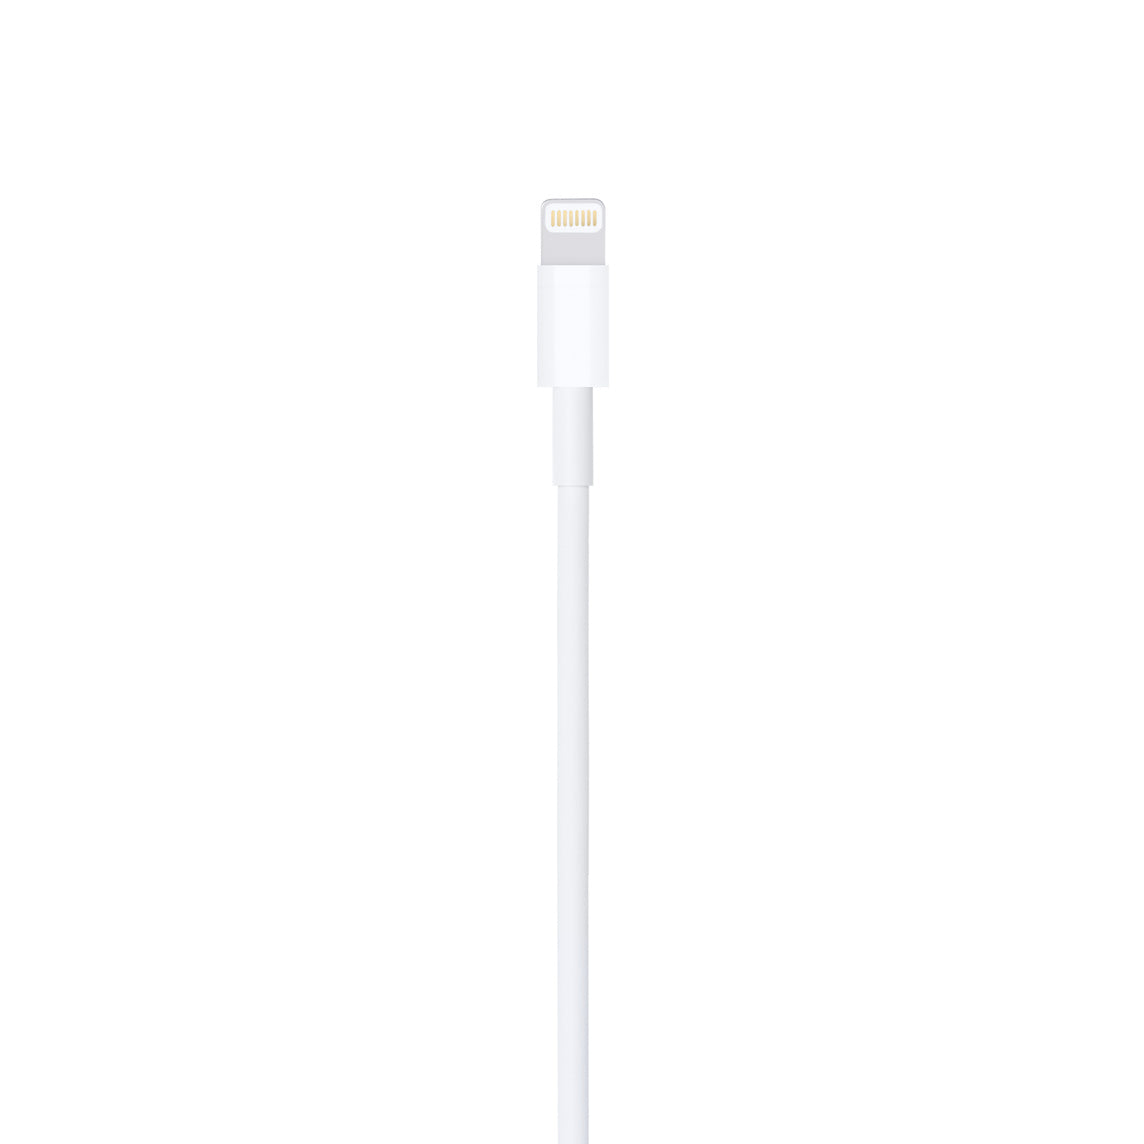 Cable Lightning a USB (1M)